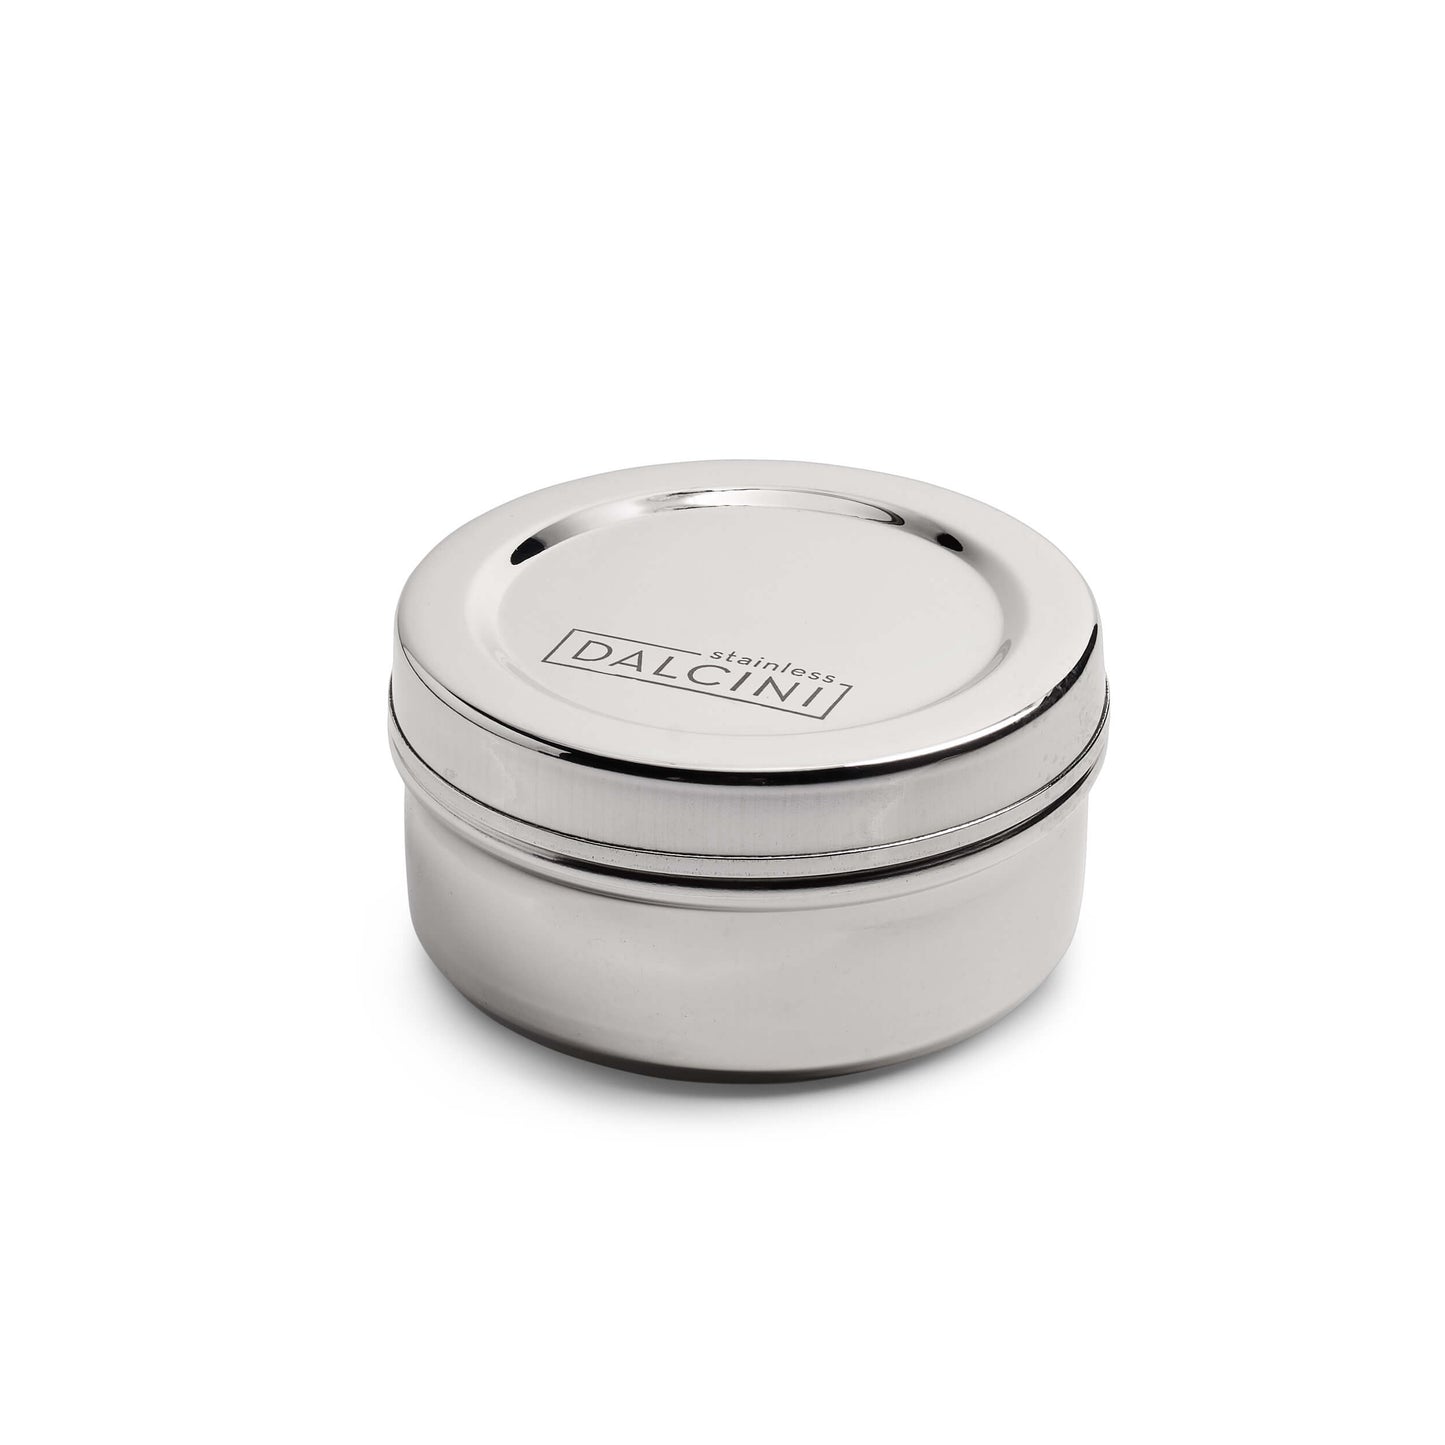 Small, round stainless steel condiment container with closed lid